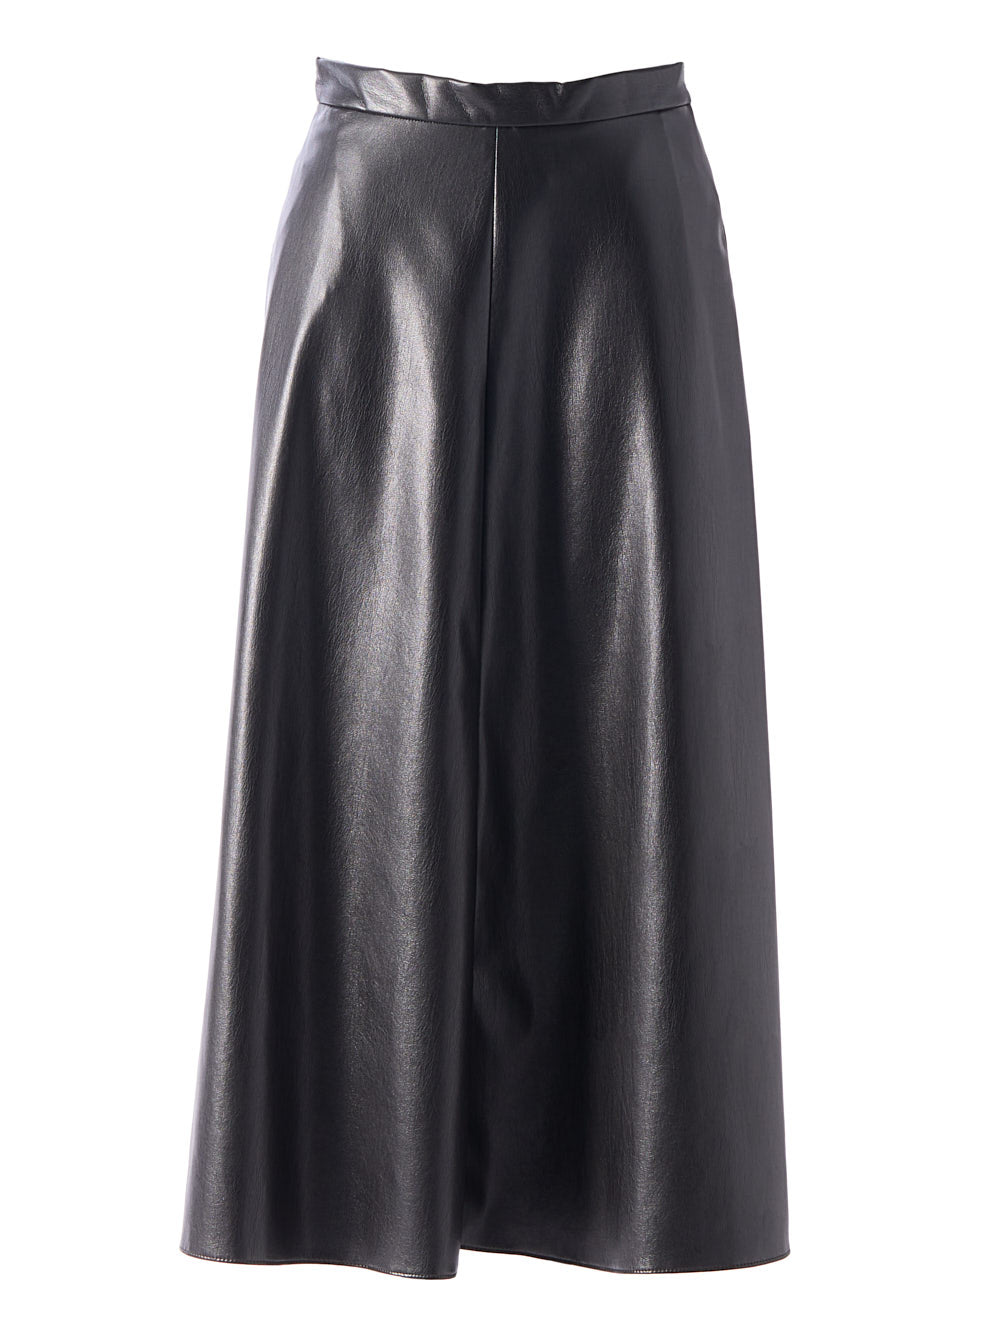 Faux Leather Skirt Black